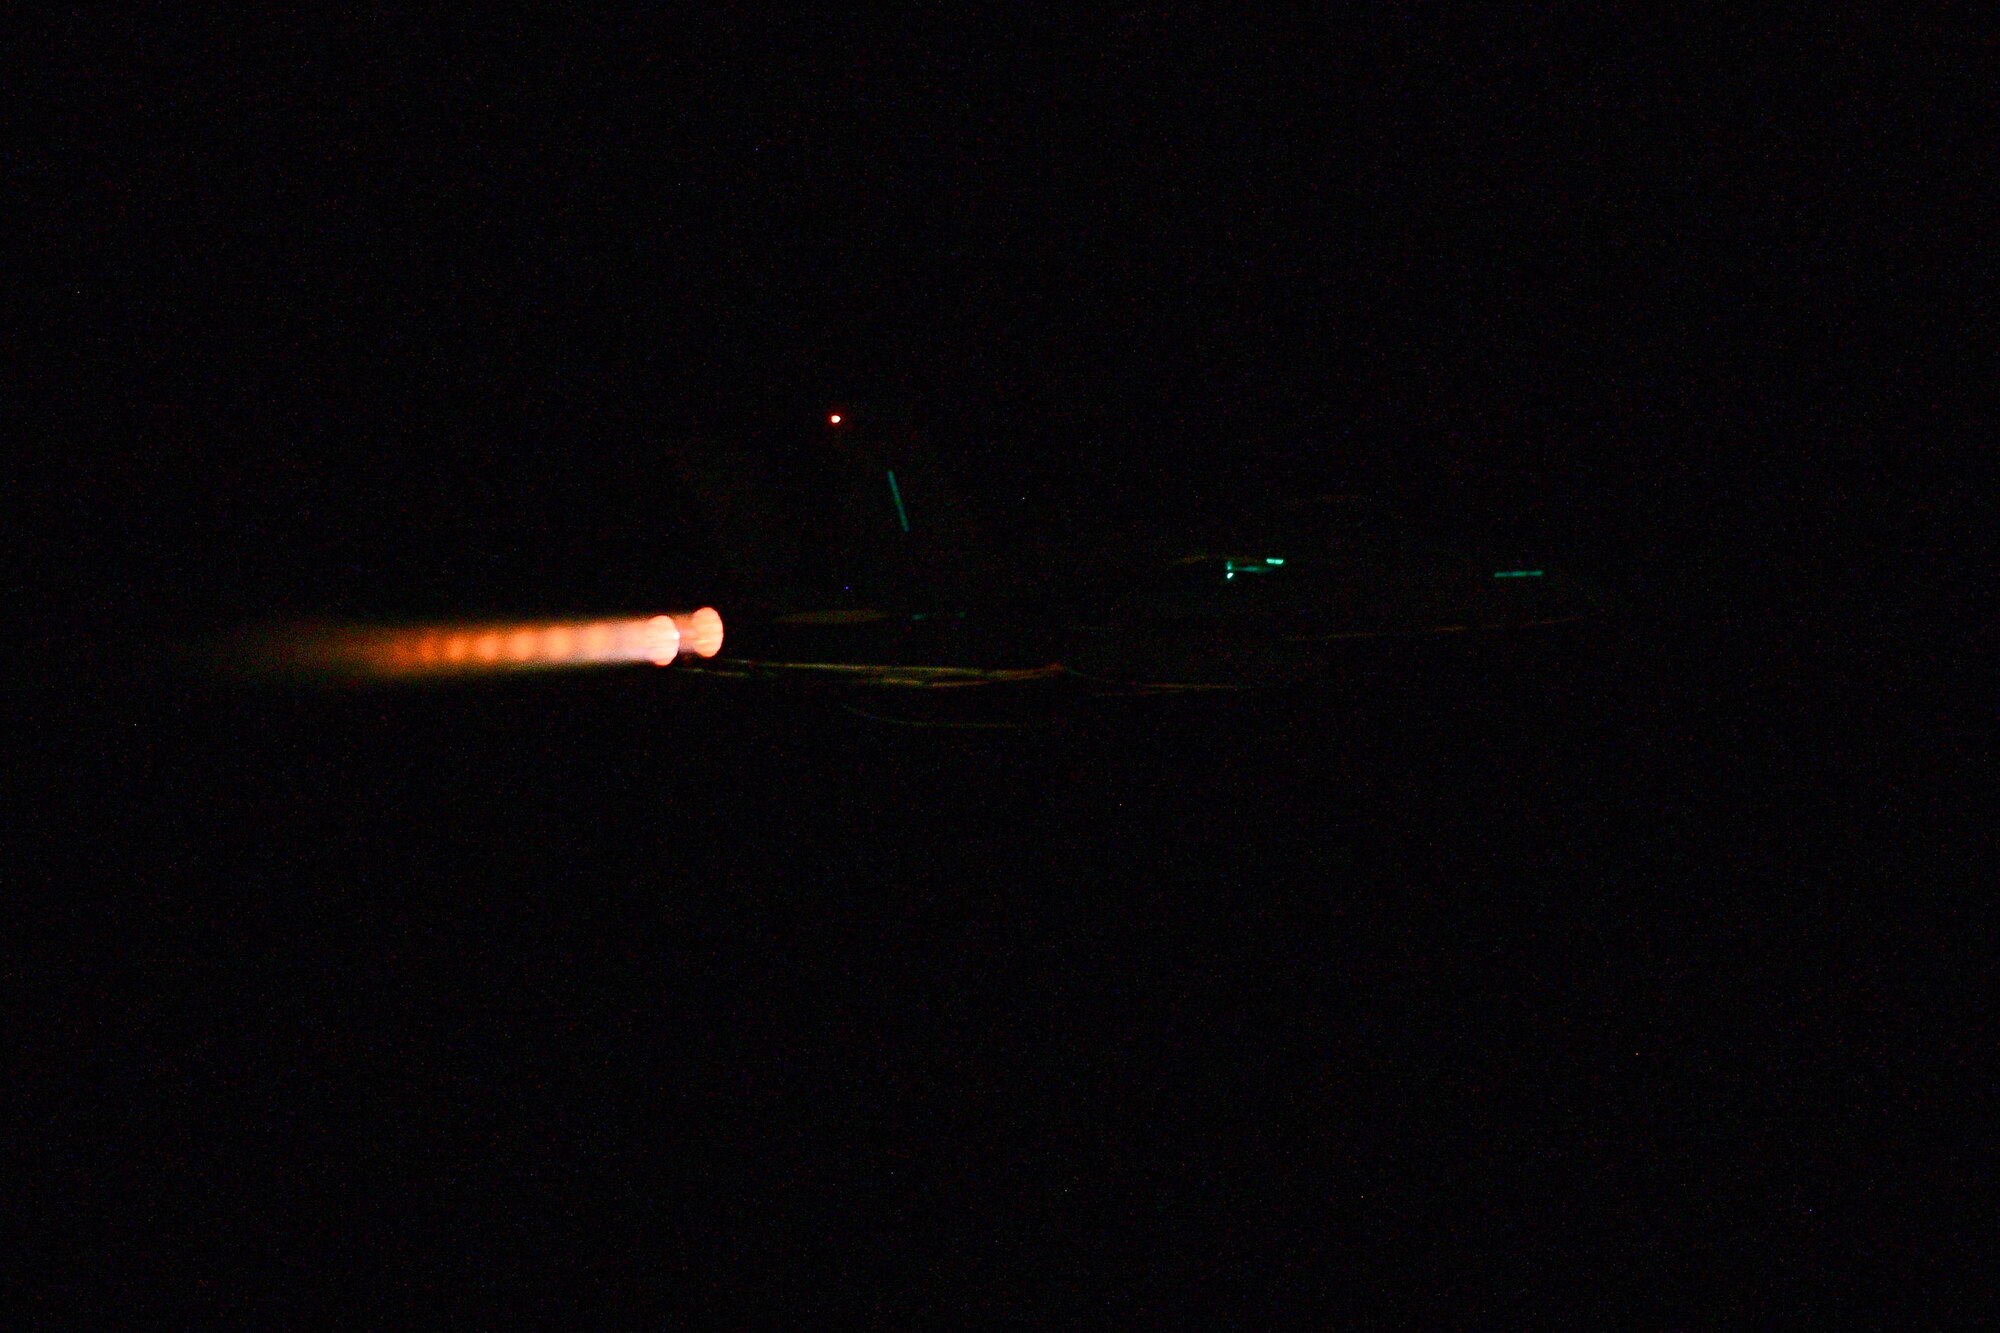 A United States Marine Corps F/A-18 Hornet assigned to the Marine Fighter Attack Squadron 323 out of Marine Corps Air Station Miramar, California, takes off at Aviano Air Base, Italy, Sept. 20, 2022. During the flights they had opportunities to identify strengths, weaknesses and capabilities while also sharpening the skills and tactics shared between the 510th Fighter Squadron and the VMFA-323 Squadron. (U.S. Air Force photo by Senior Airman Brooke Moeder)